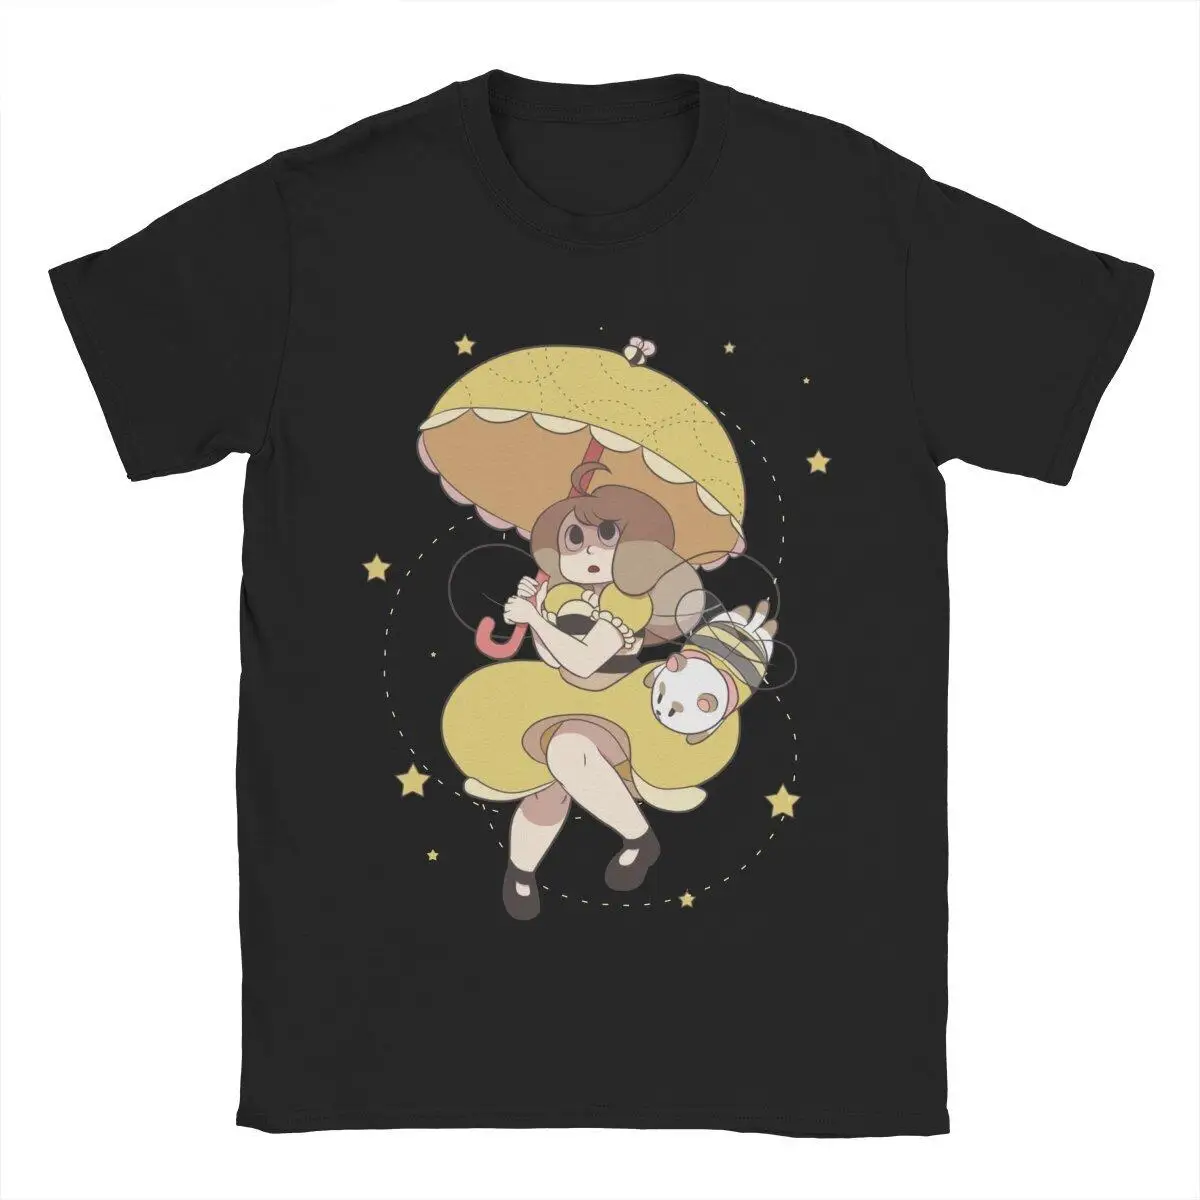 Men's T-Shirts Bee And PuppyCat Girl And Bee Novelty 100% Cotton Tees Short Sleeve  T Shirt Round Collar Tops Gift Idea